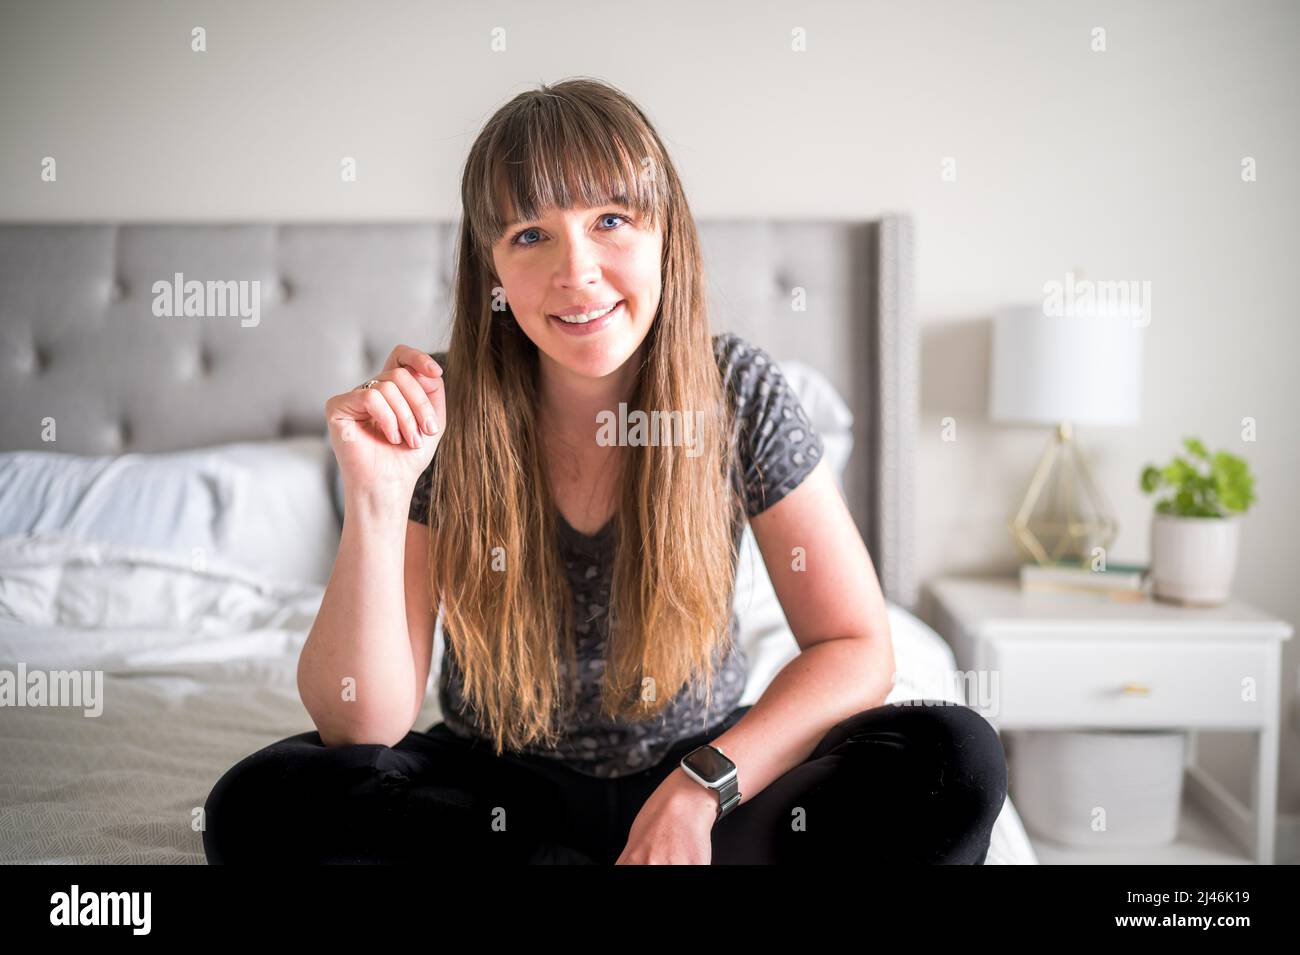 Caucasian woman with brown hair and bangs sitting on a bed Stock Photo